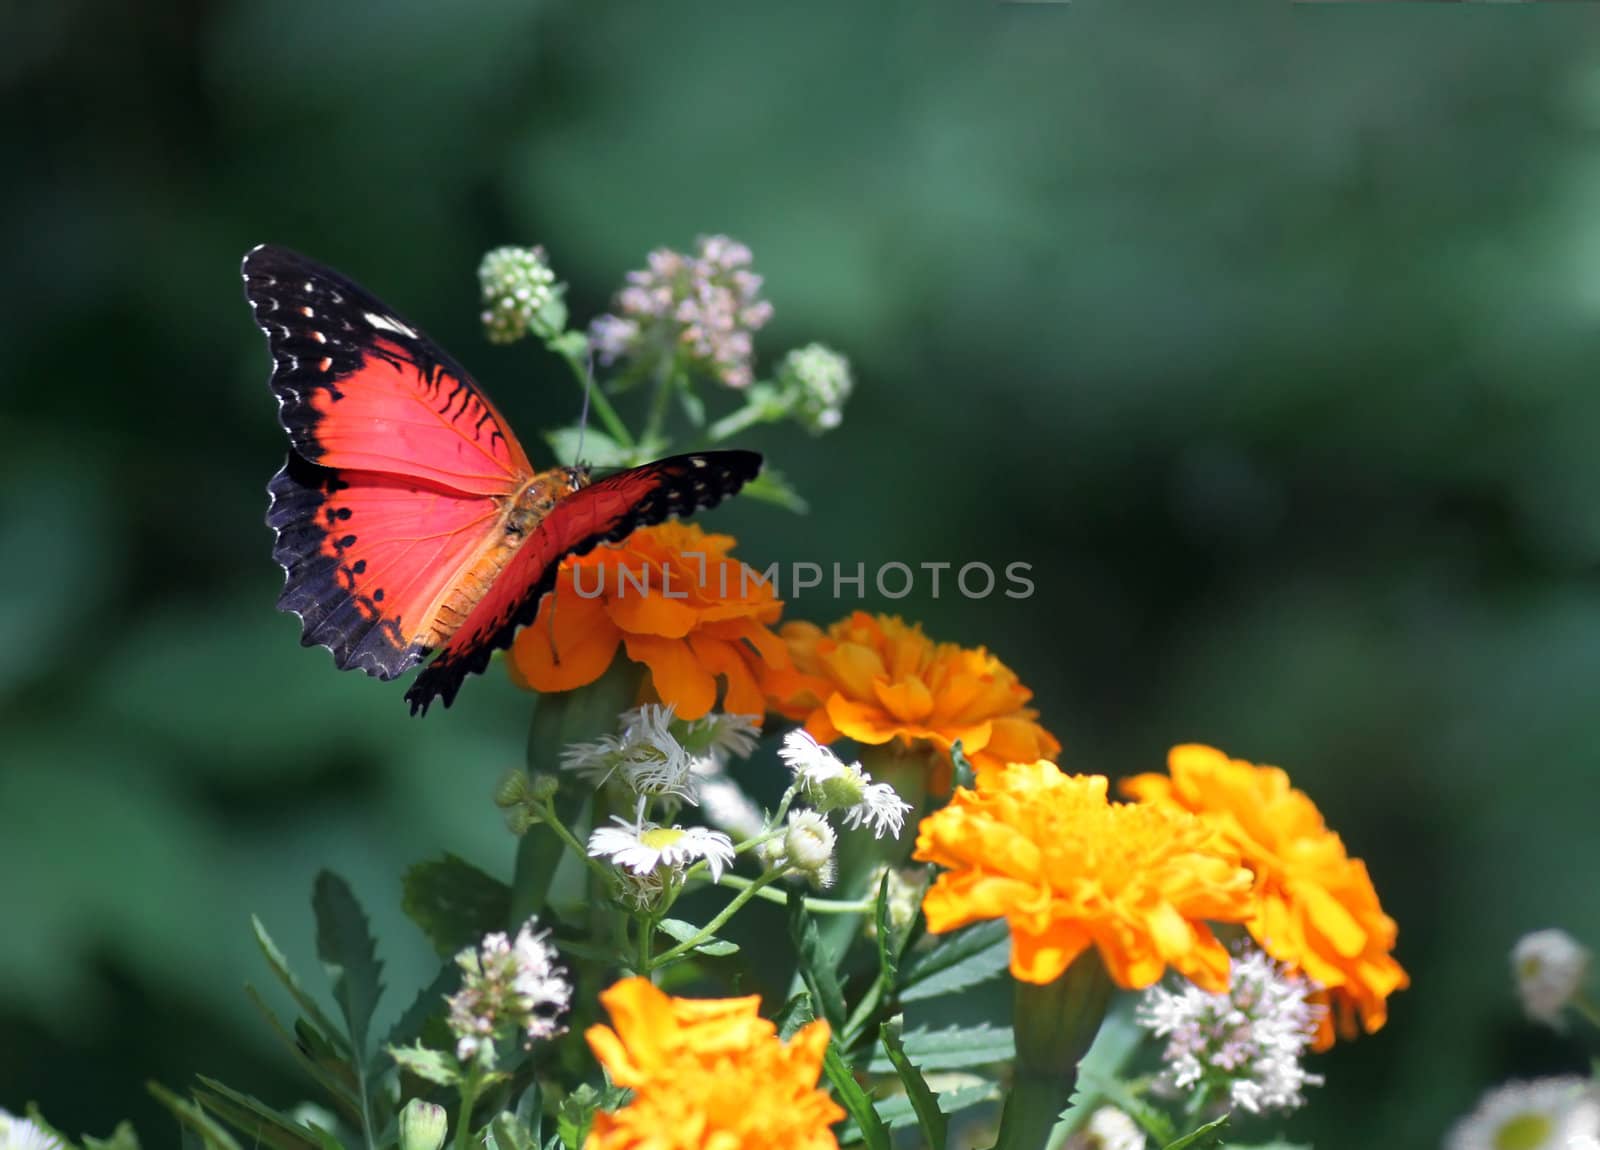 butterfly (Red Lacewing) sitting on flower